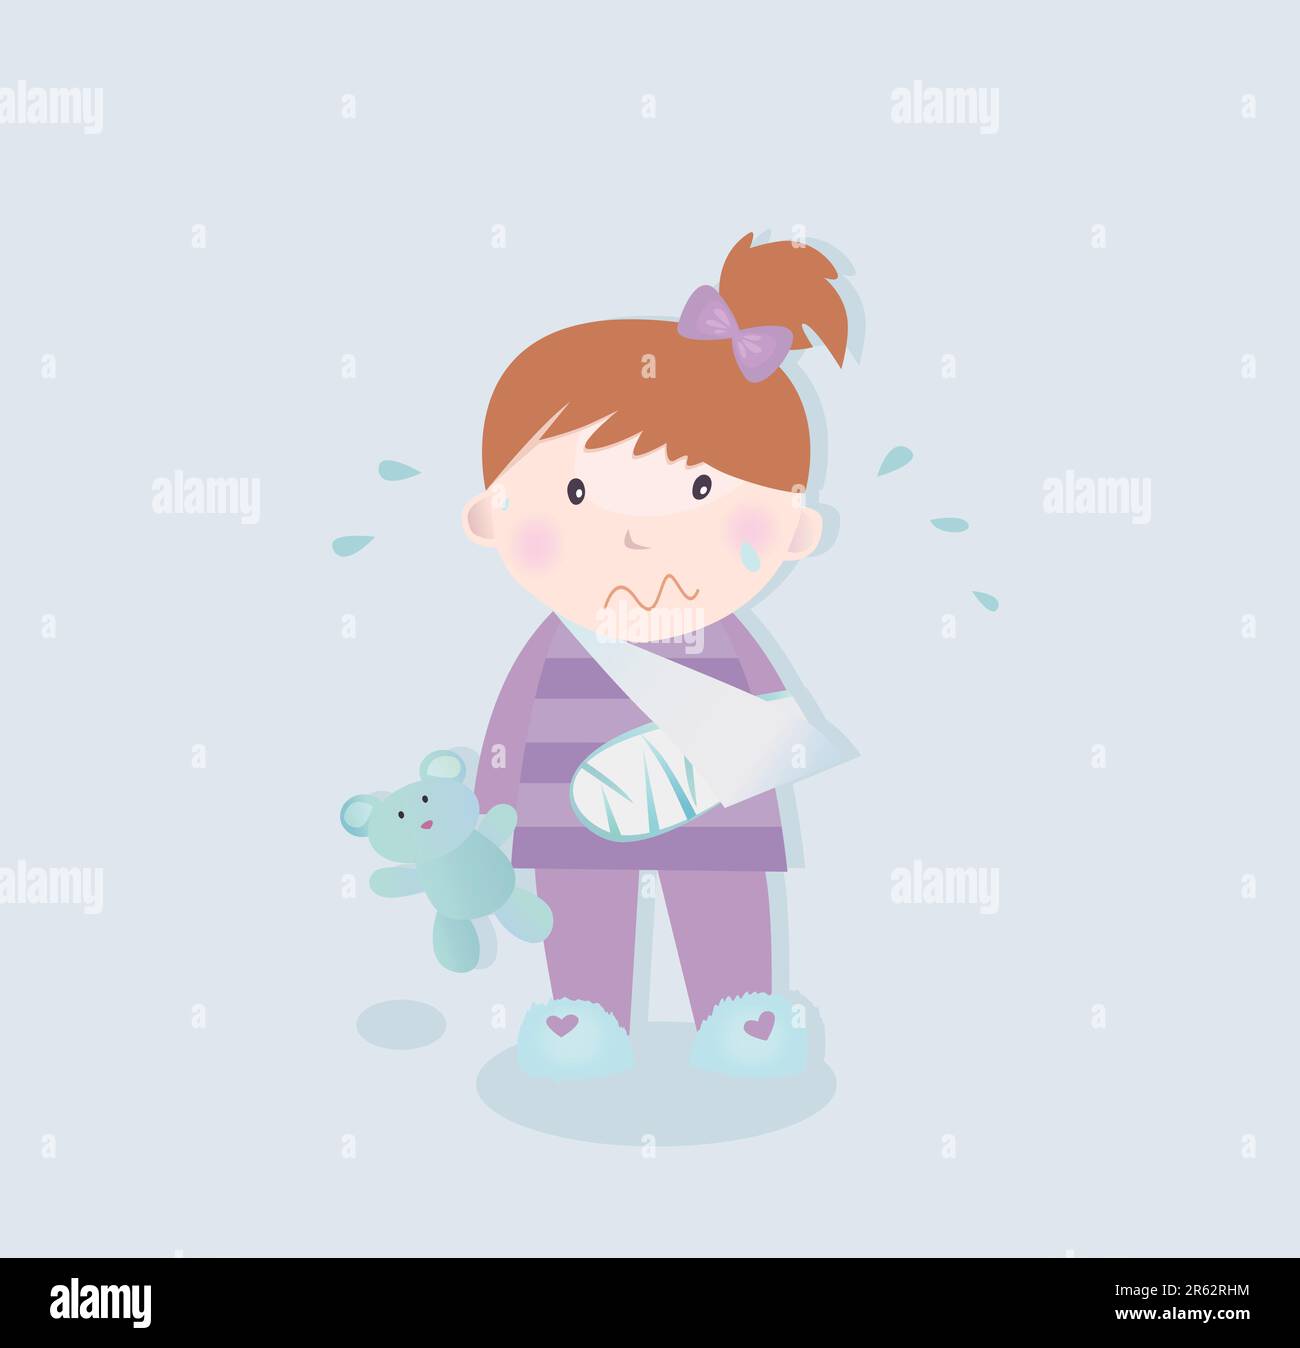 Small crying child with fractured bone and blue teddy bear. Vector Illustration. Stock Vector